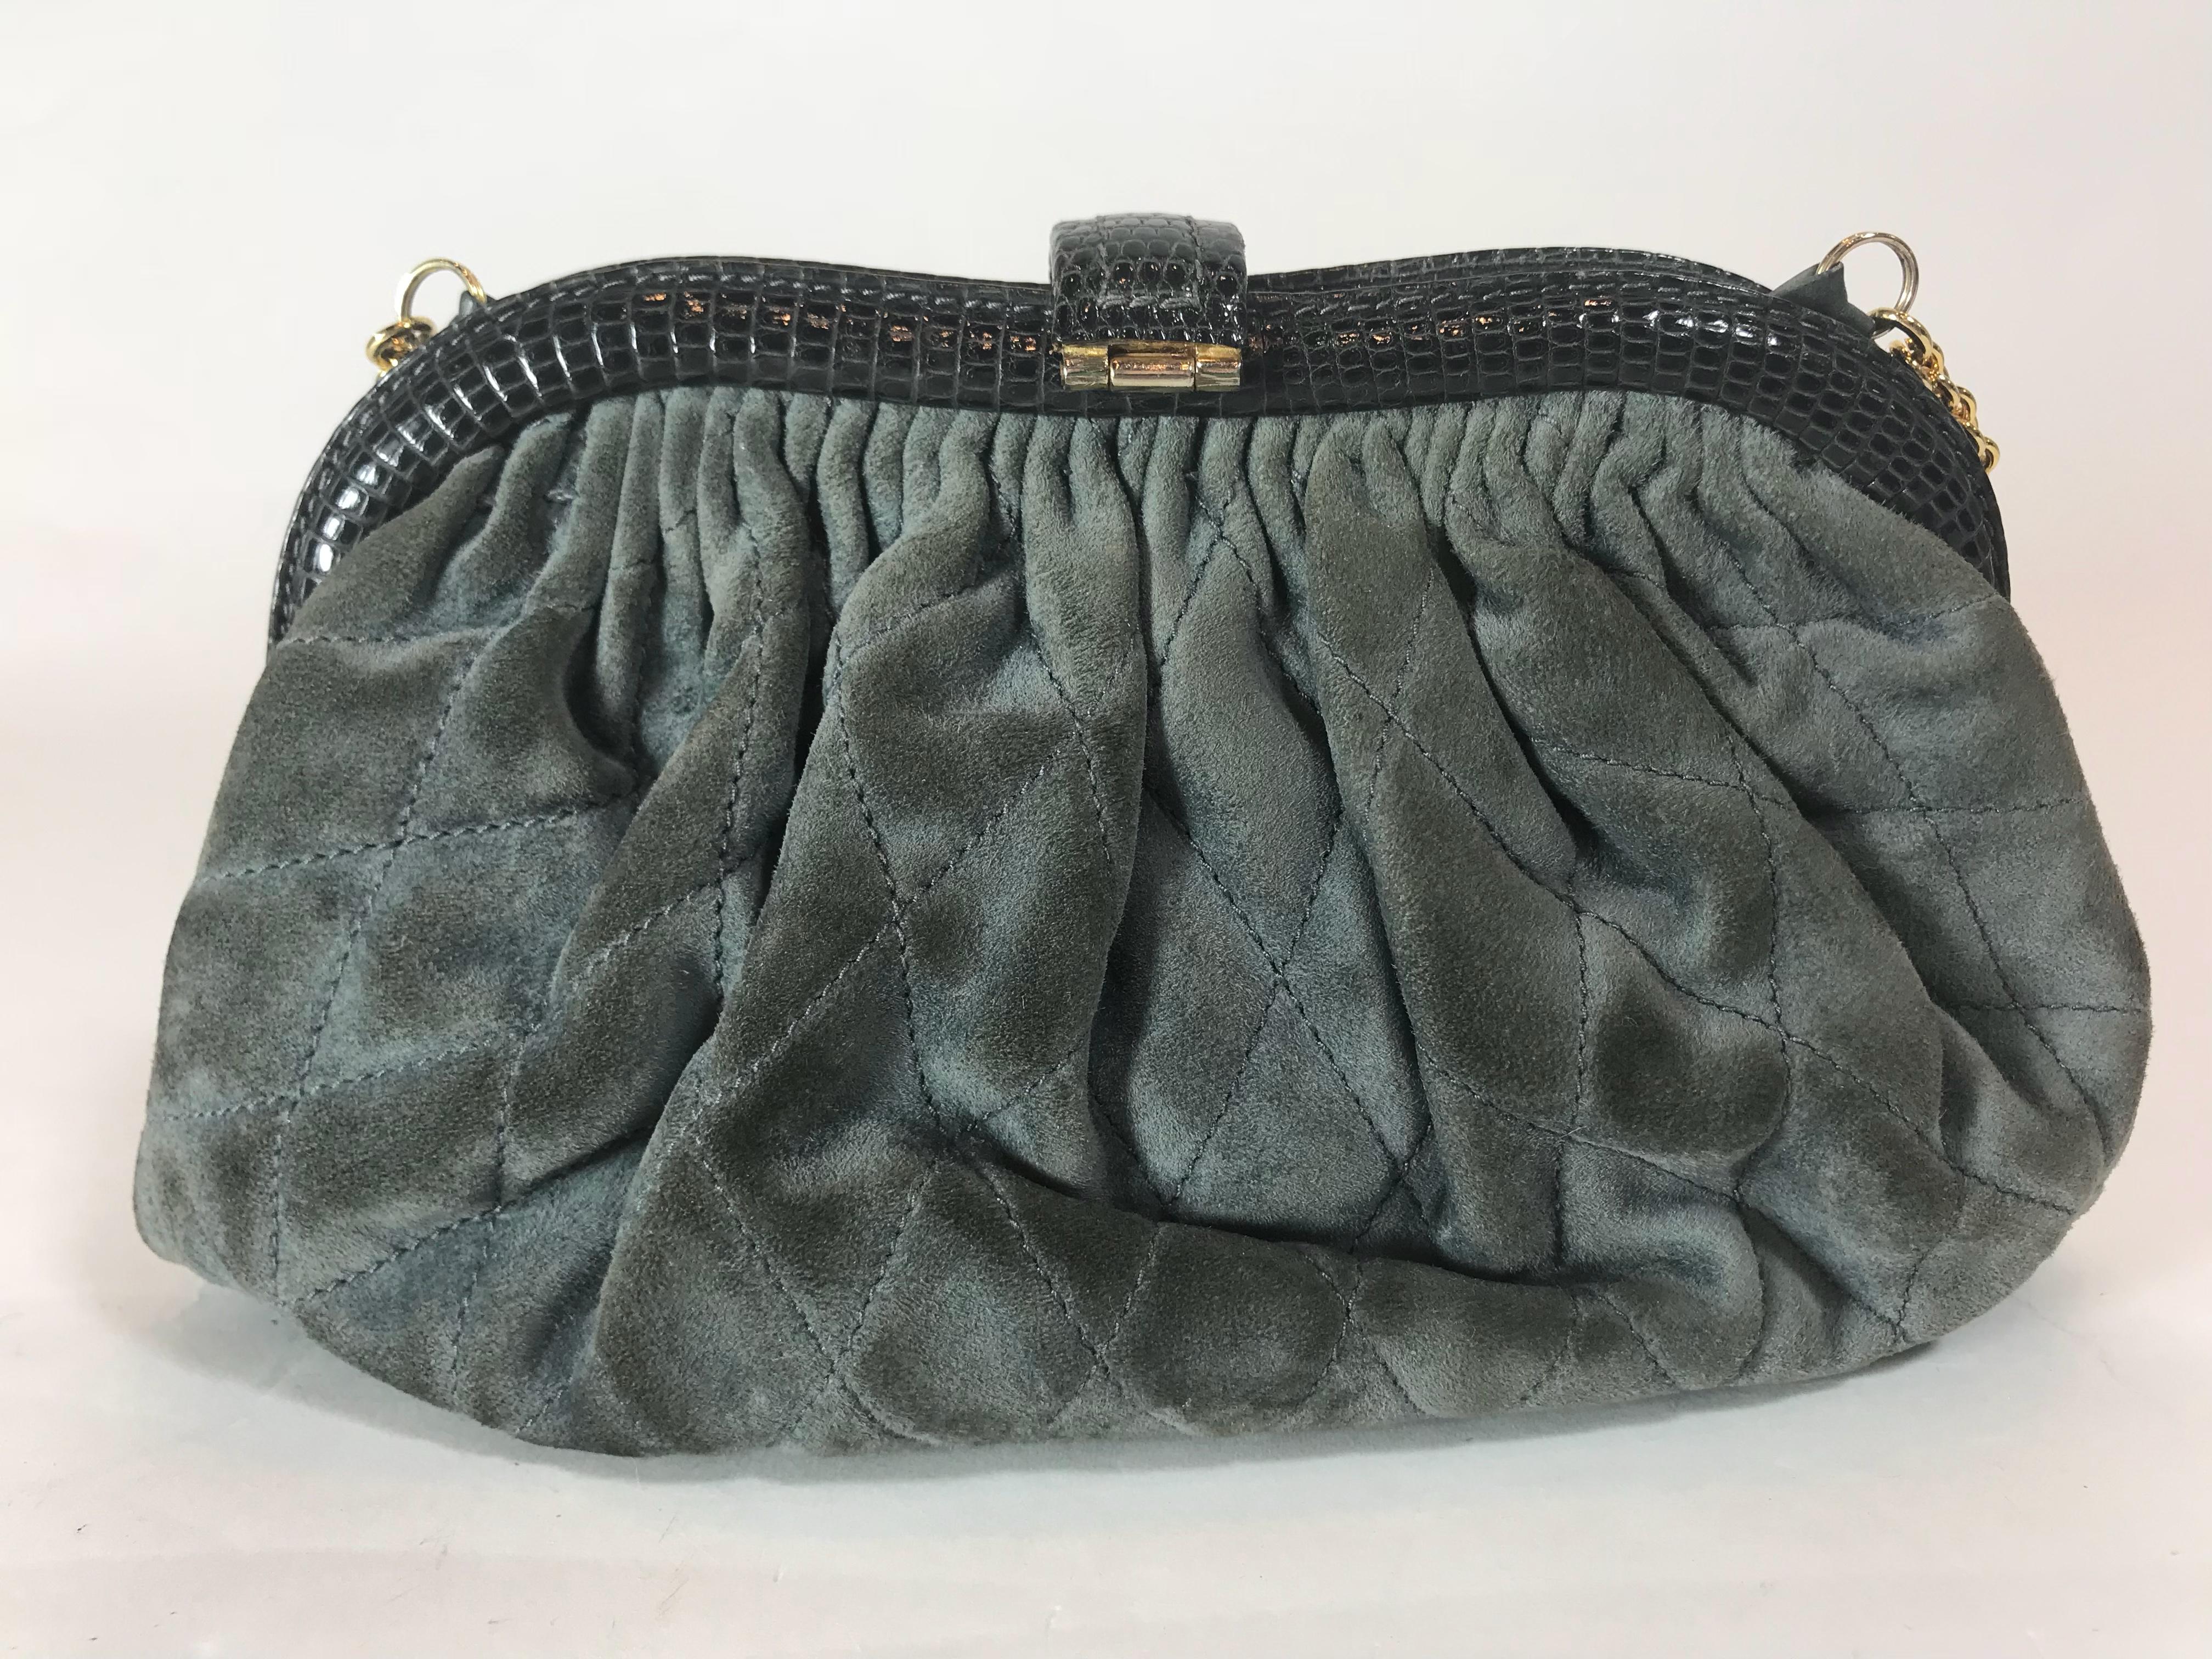 Chanel Vintage Python Suede Quilted Evening Clutch In Fair Condition For Sale In Roslyn, NY